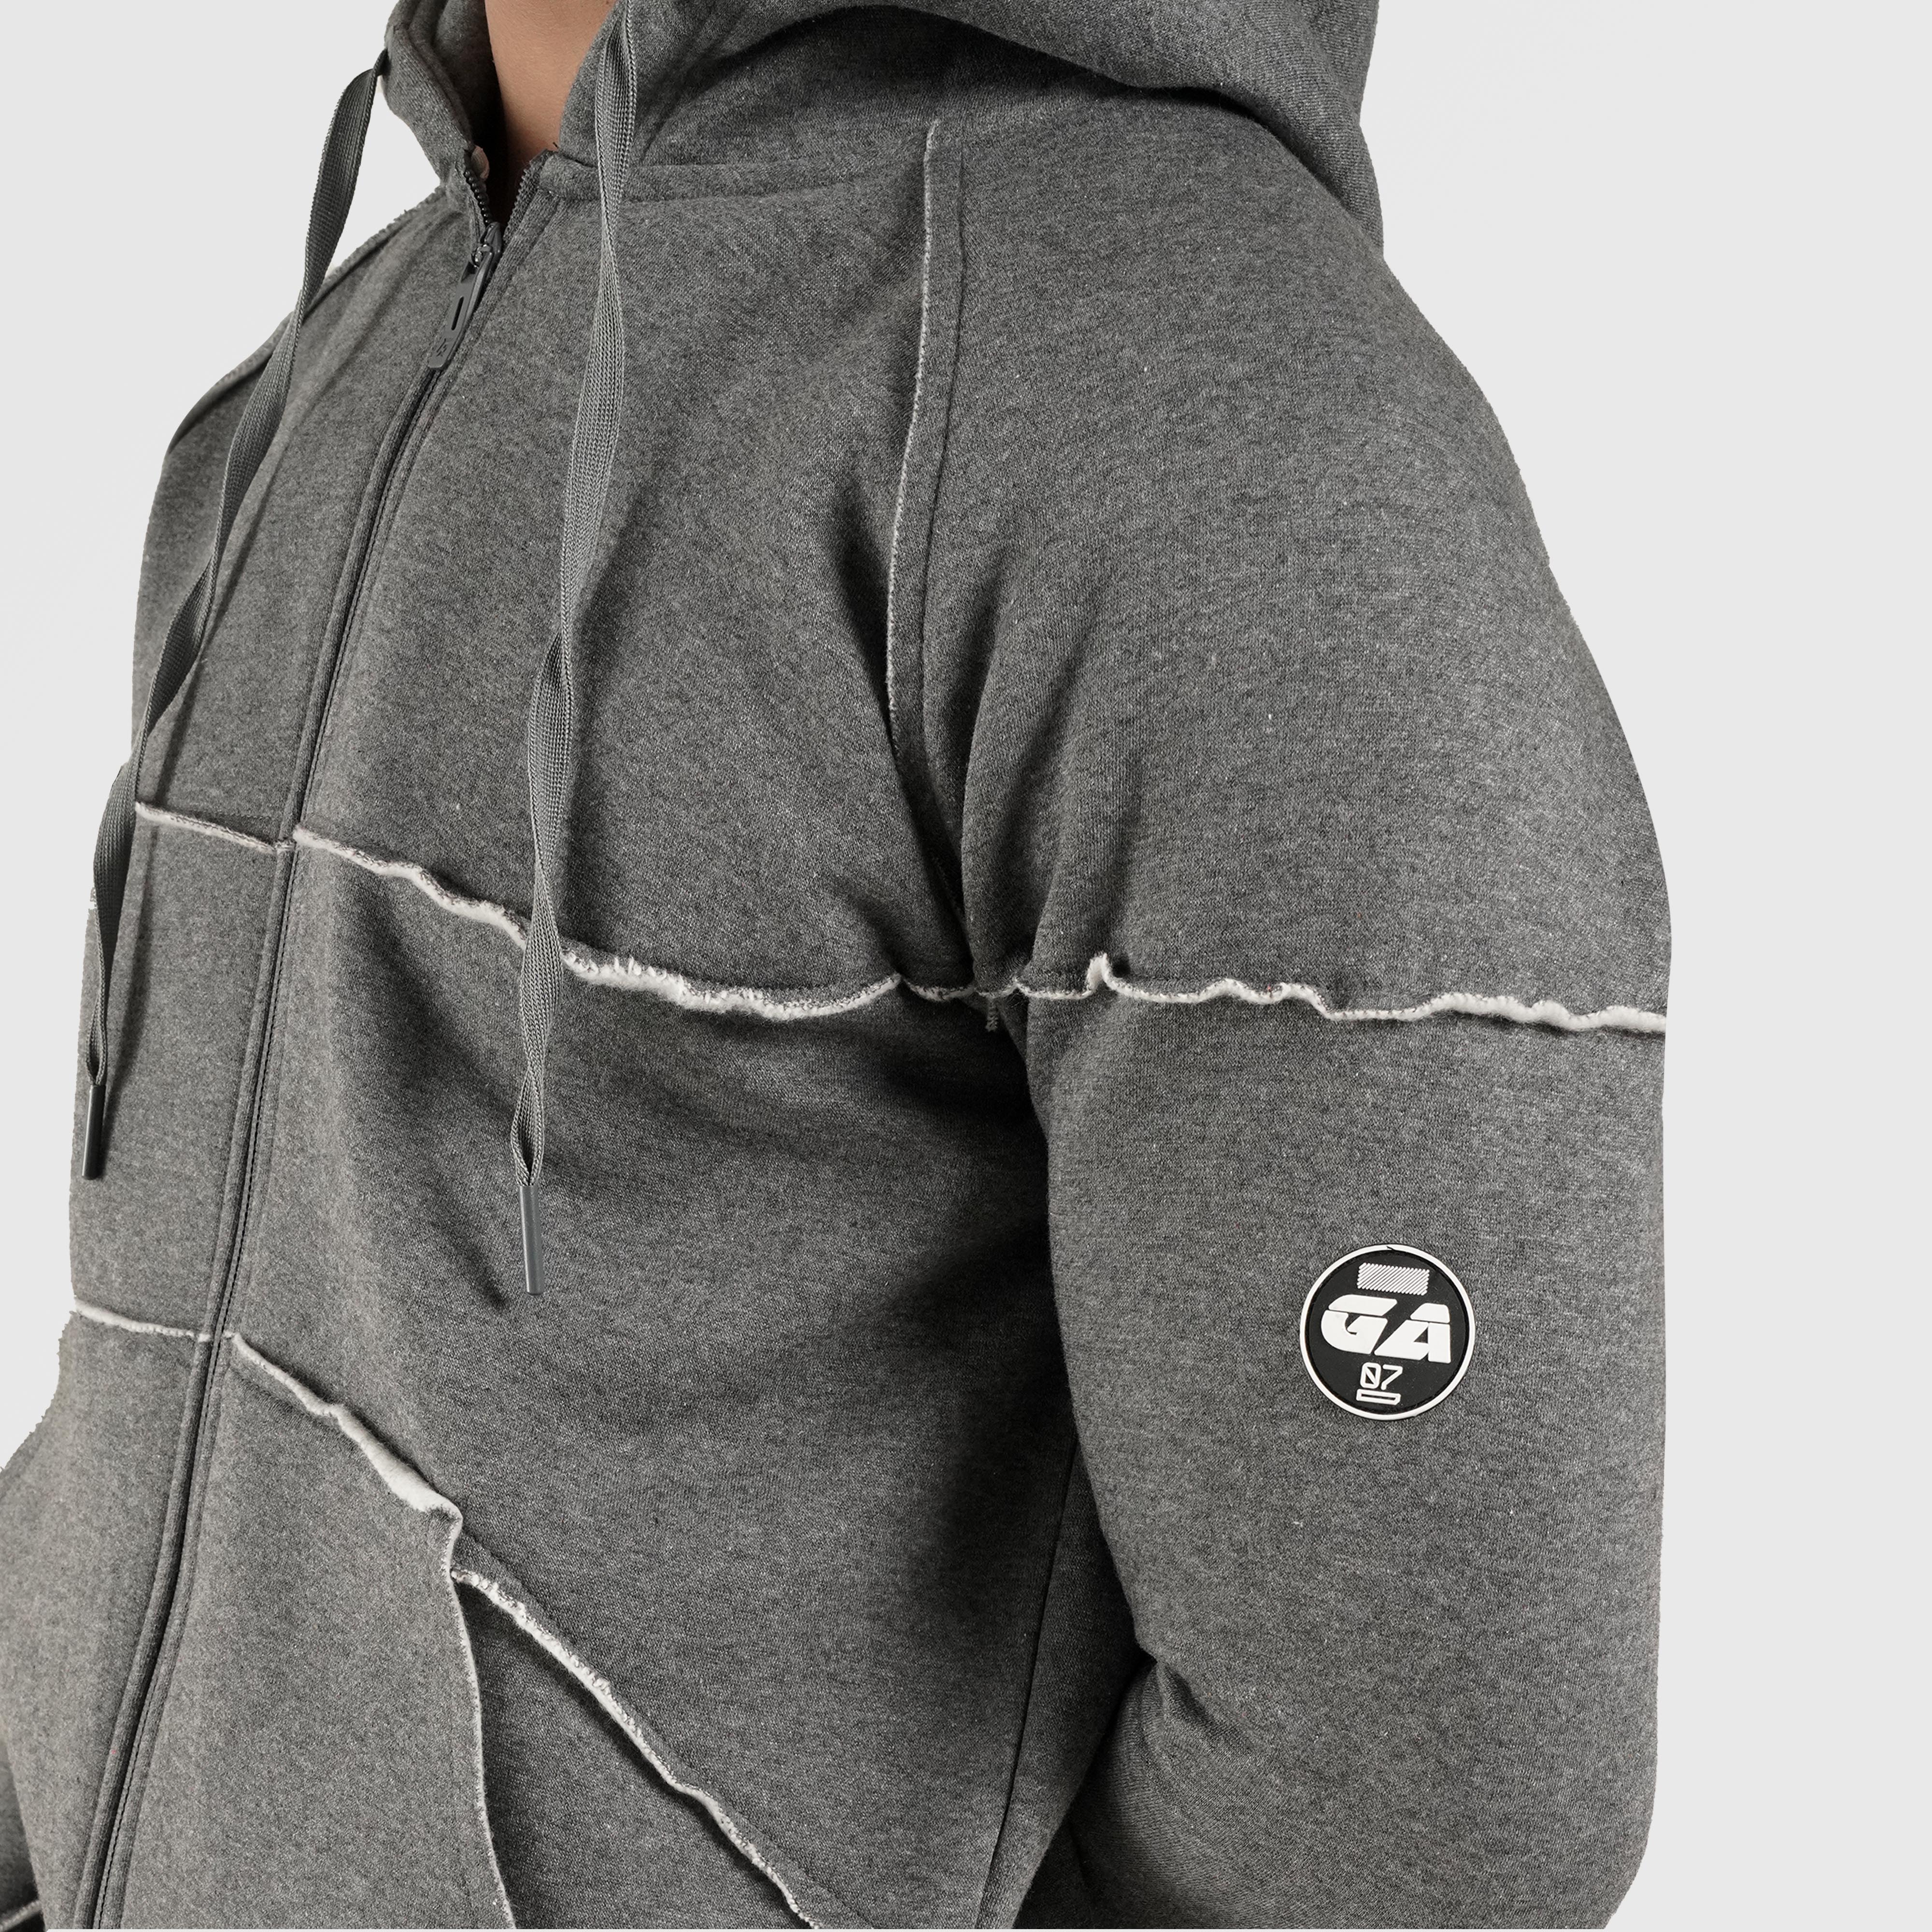 Rigger Hoodie (Charcoal)